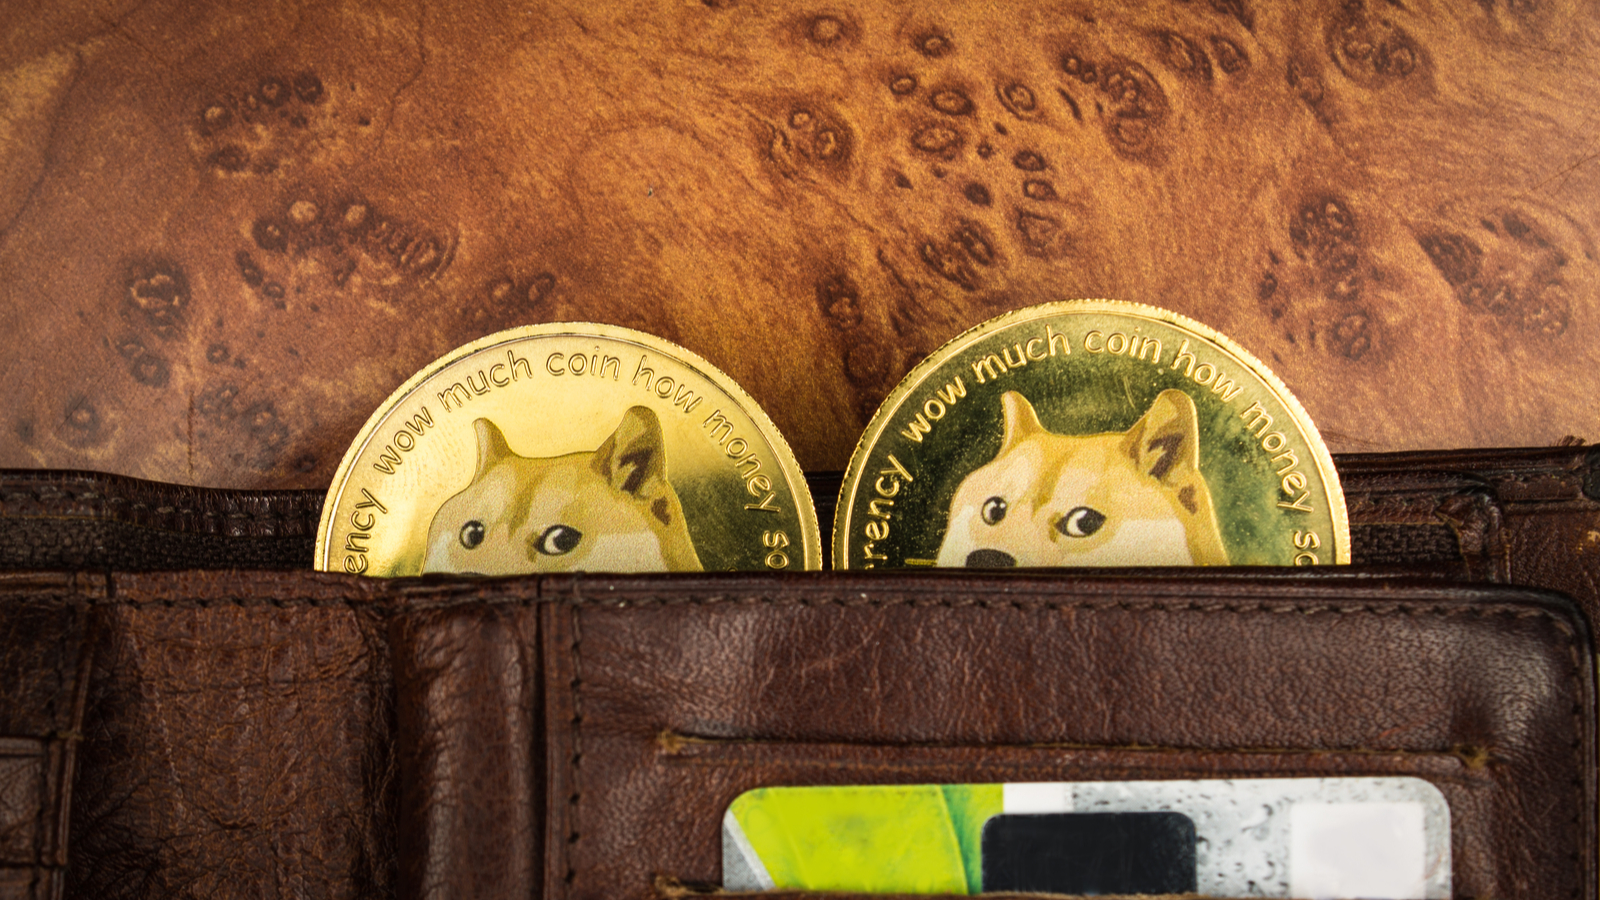 Dogecoin Price Predictions with doge faces peeking out of brown leather wallet. The coins have the words 